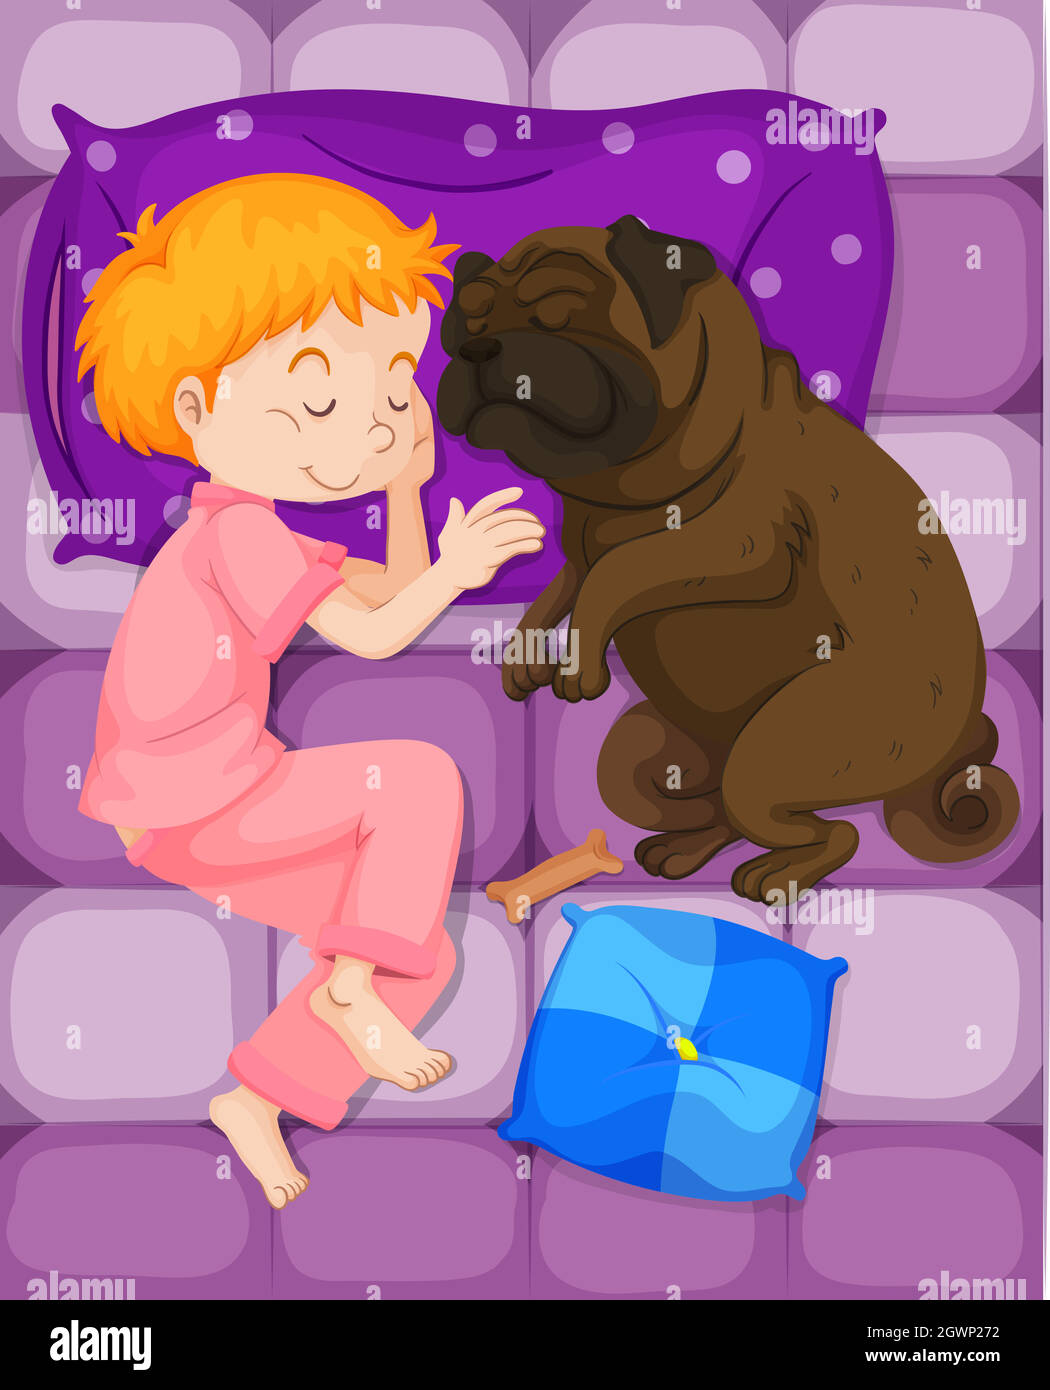 Little boy sleeping with pet dog in bed Stock Vector